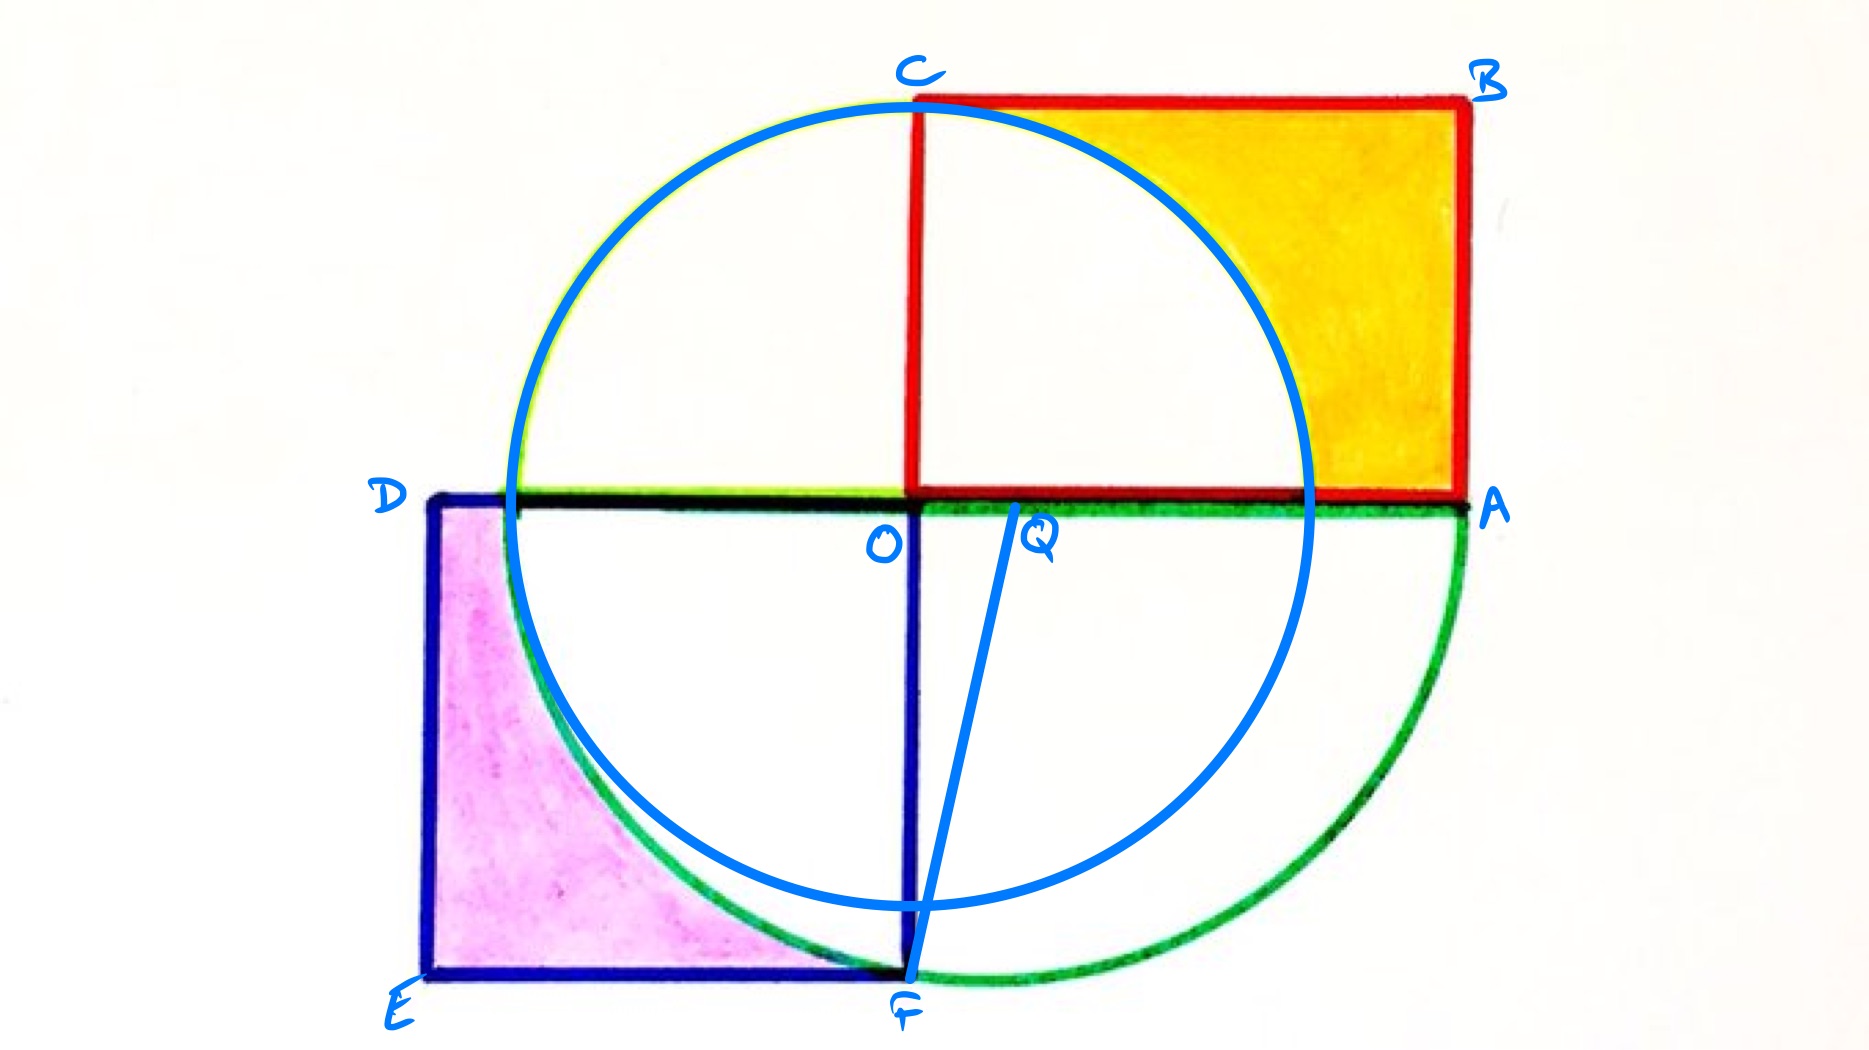 Square, rectangle, and two semi-circles labelled